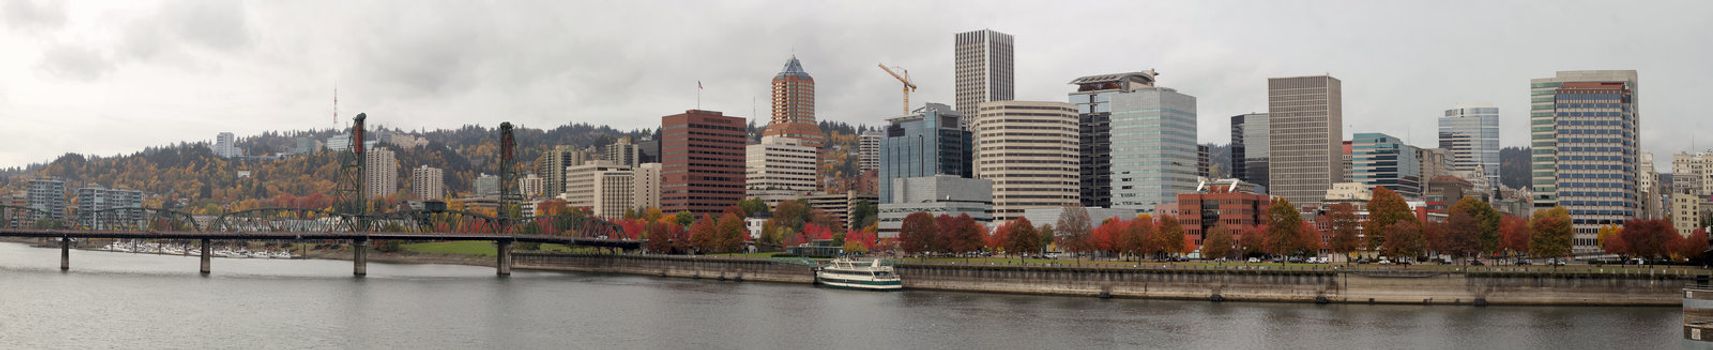 Portland Oregon Downtown Waterfront City Skyline in the Fall Panorama